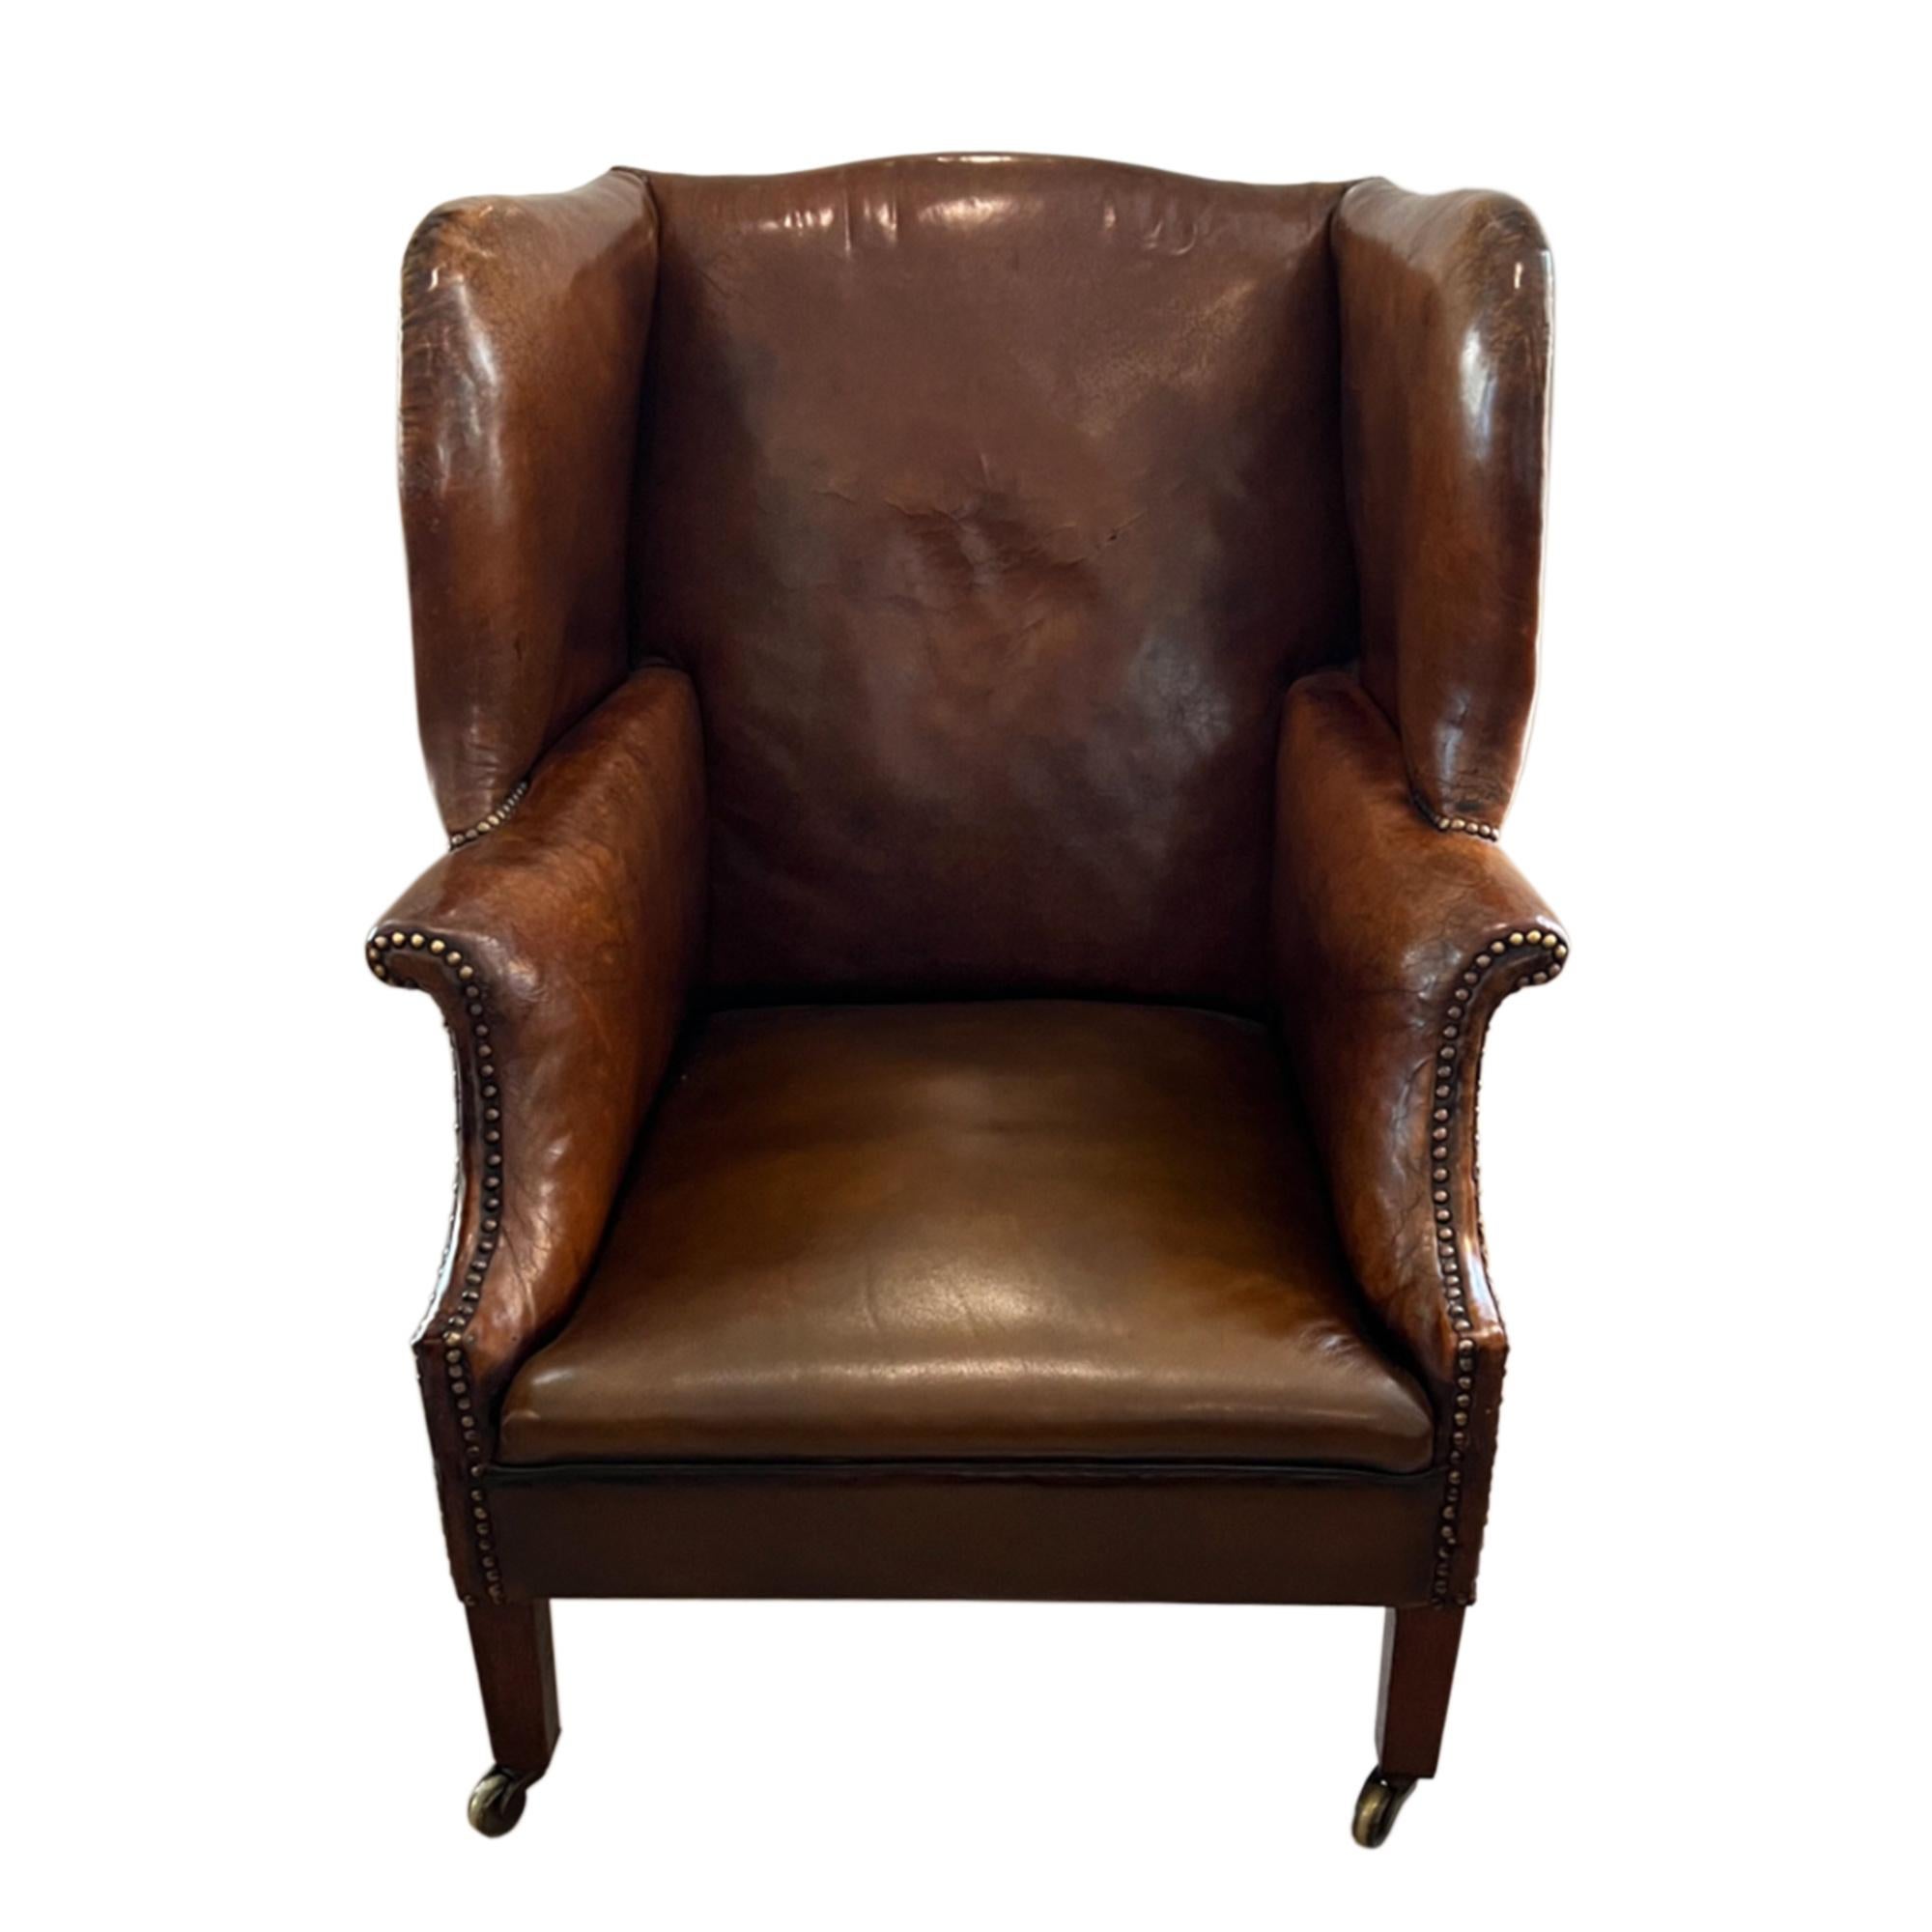 This extremely comfortable leather wing chair was made in England in the early 20th century. Beautifully constructed with a rich brown leather, brass studs and mahogany legs. The front feet are finished with the original brass castors - please take